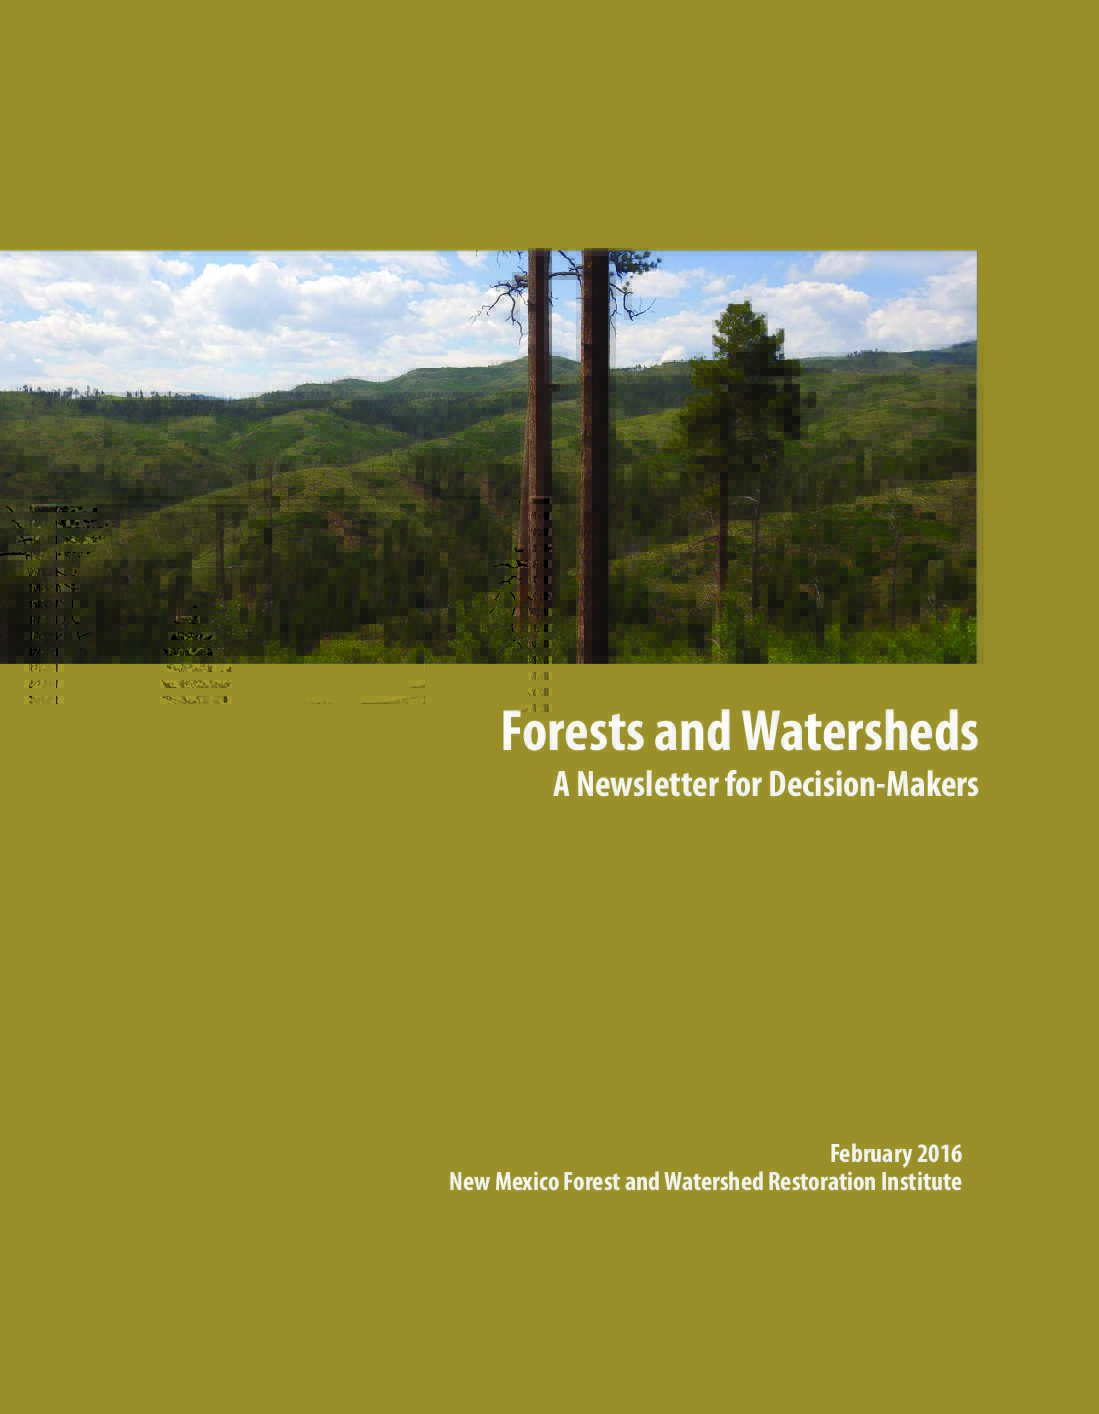 NMFWRI Forests and Watersheds Newsletter-2016